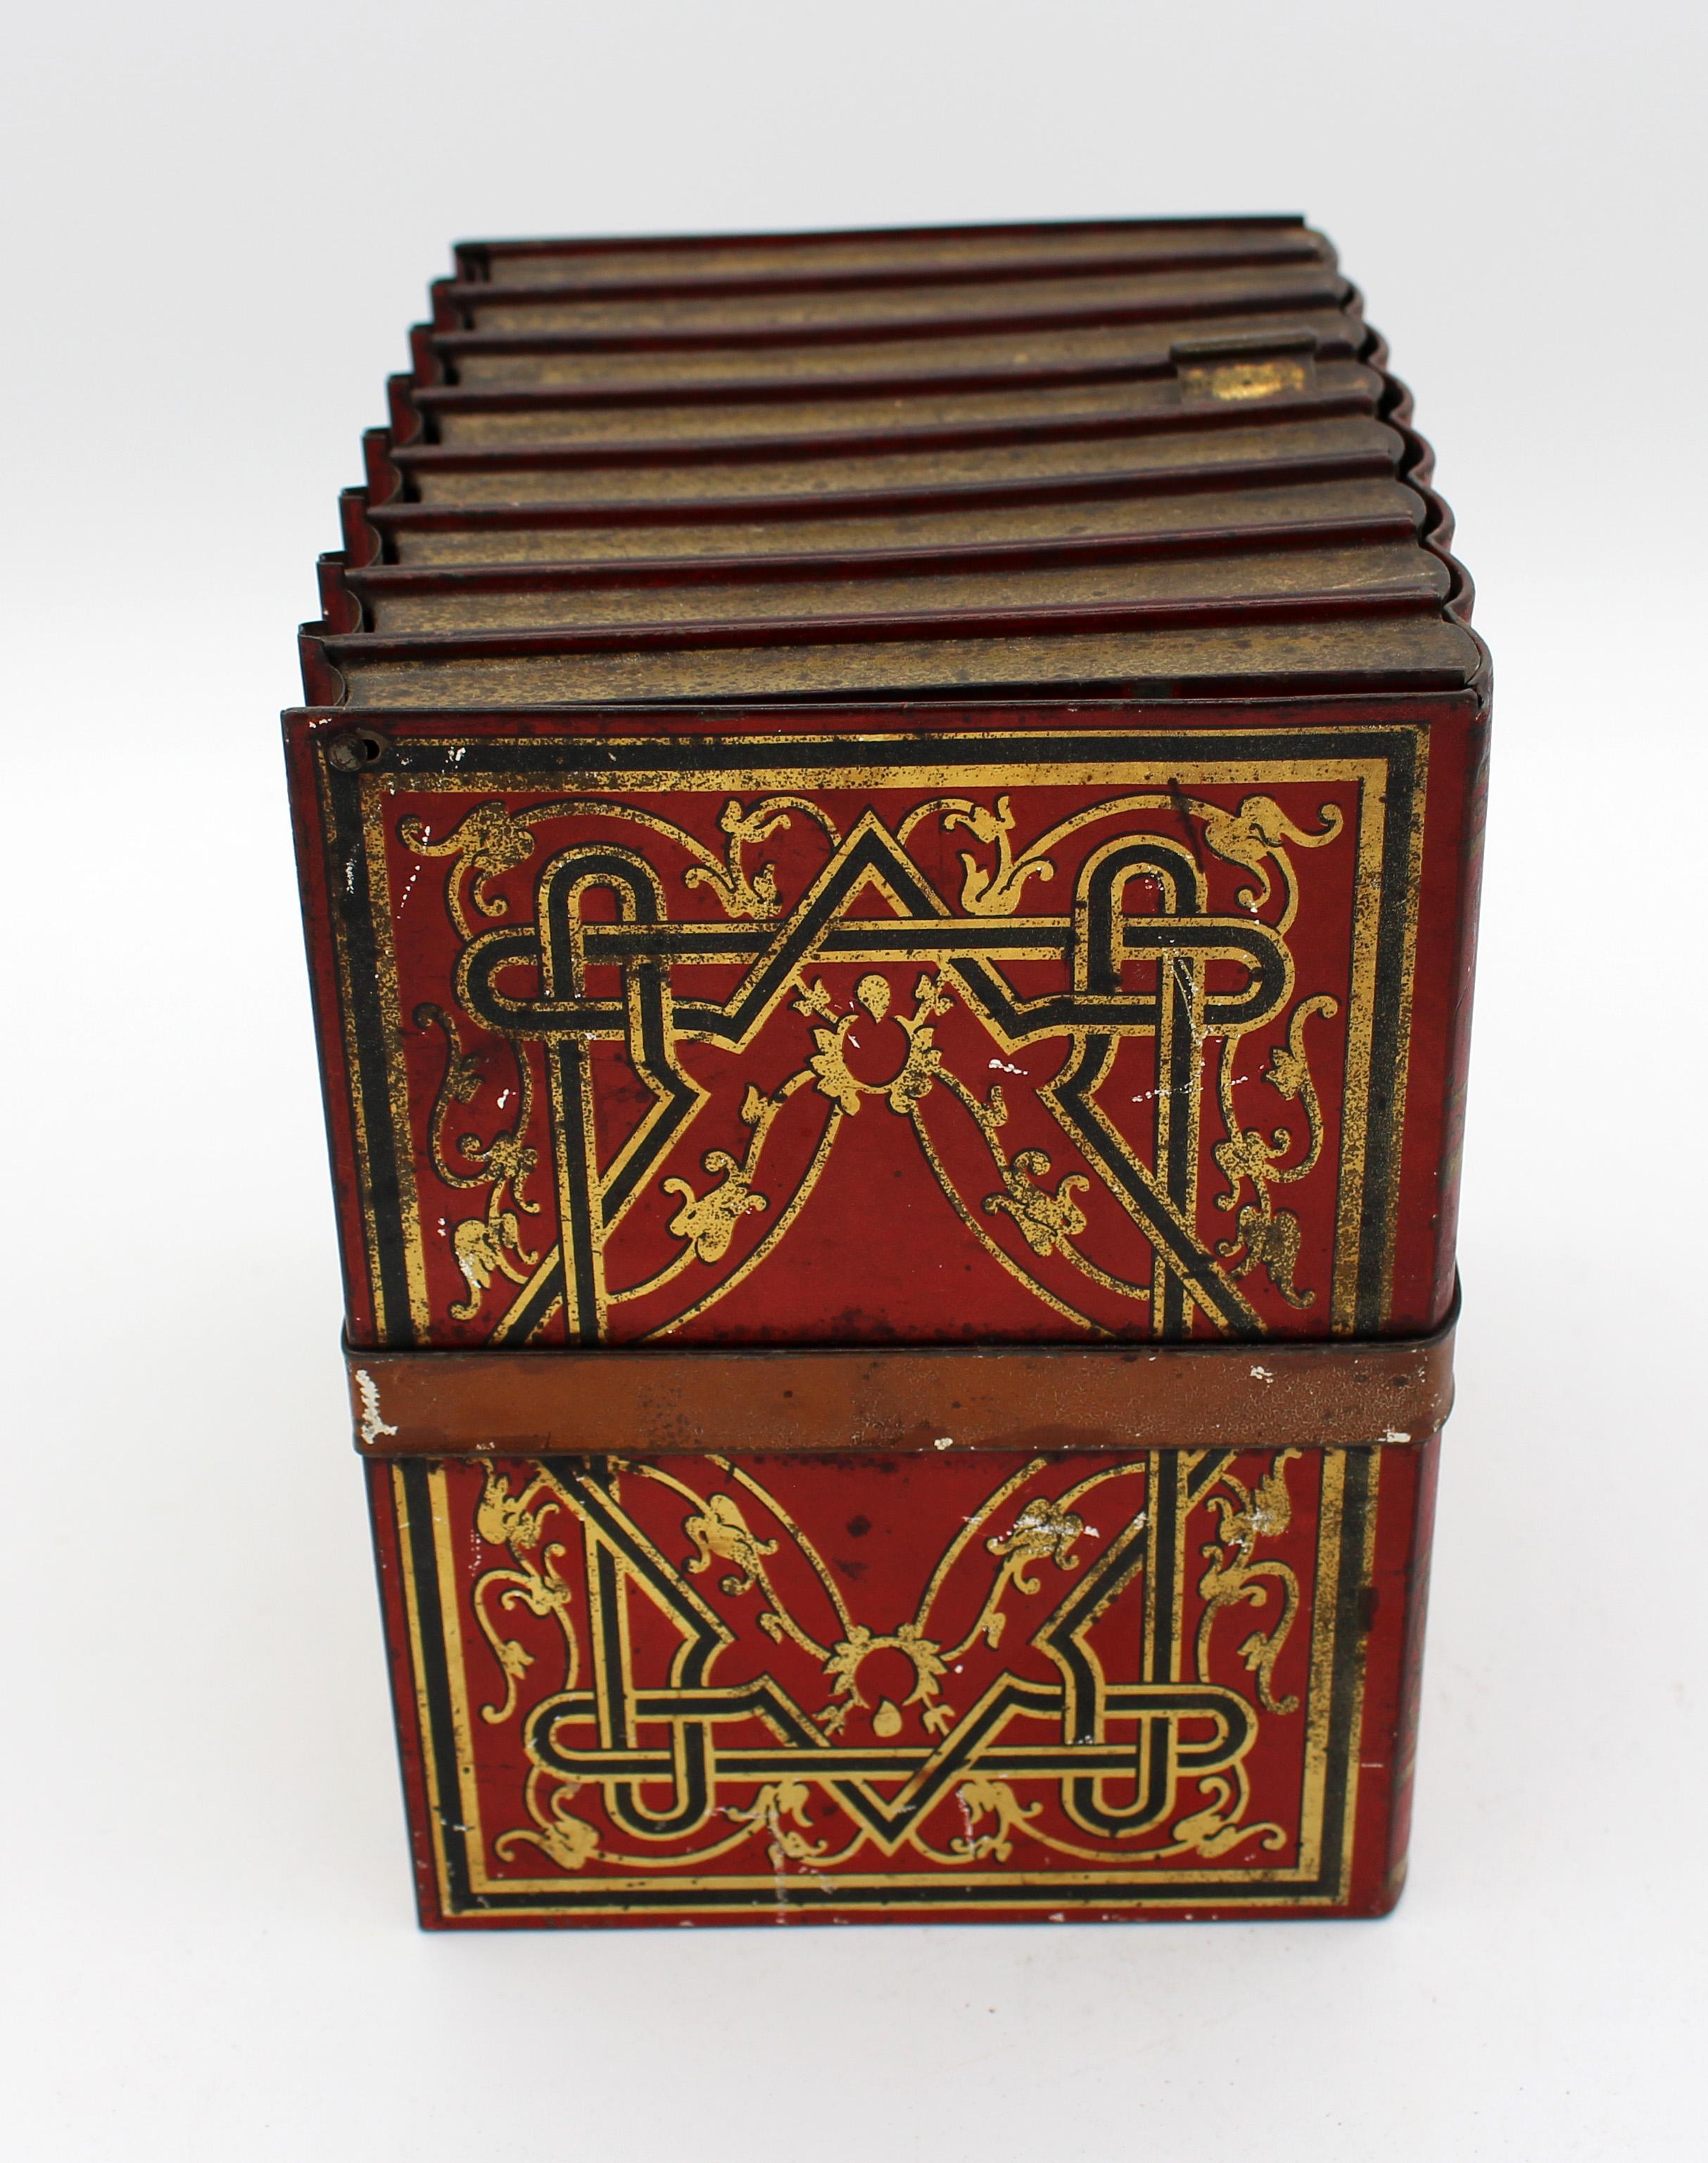 Faux books biscuit tin box by Huntley & Palmers, 1910, English. In the form of a strapped group of generic books old red & black paint with gilt work and tan strap. Overall wear commensurate with age & use.
6.5